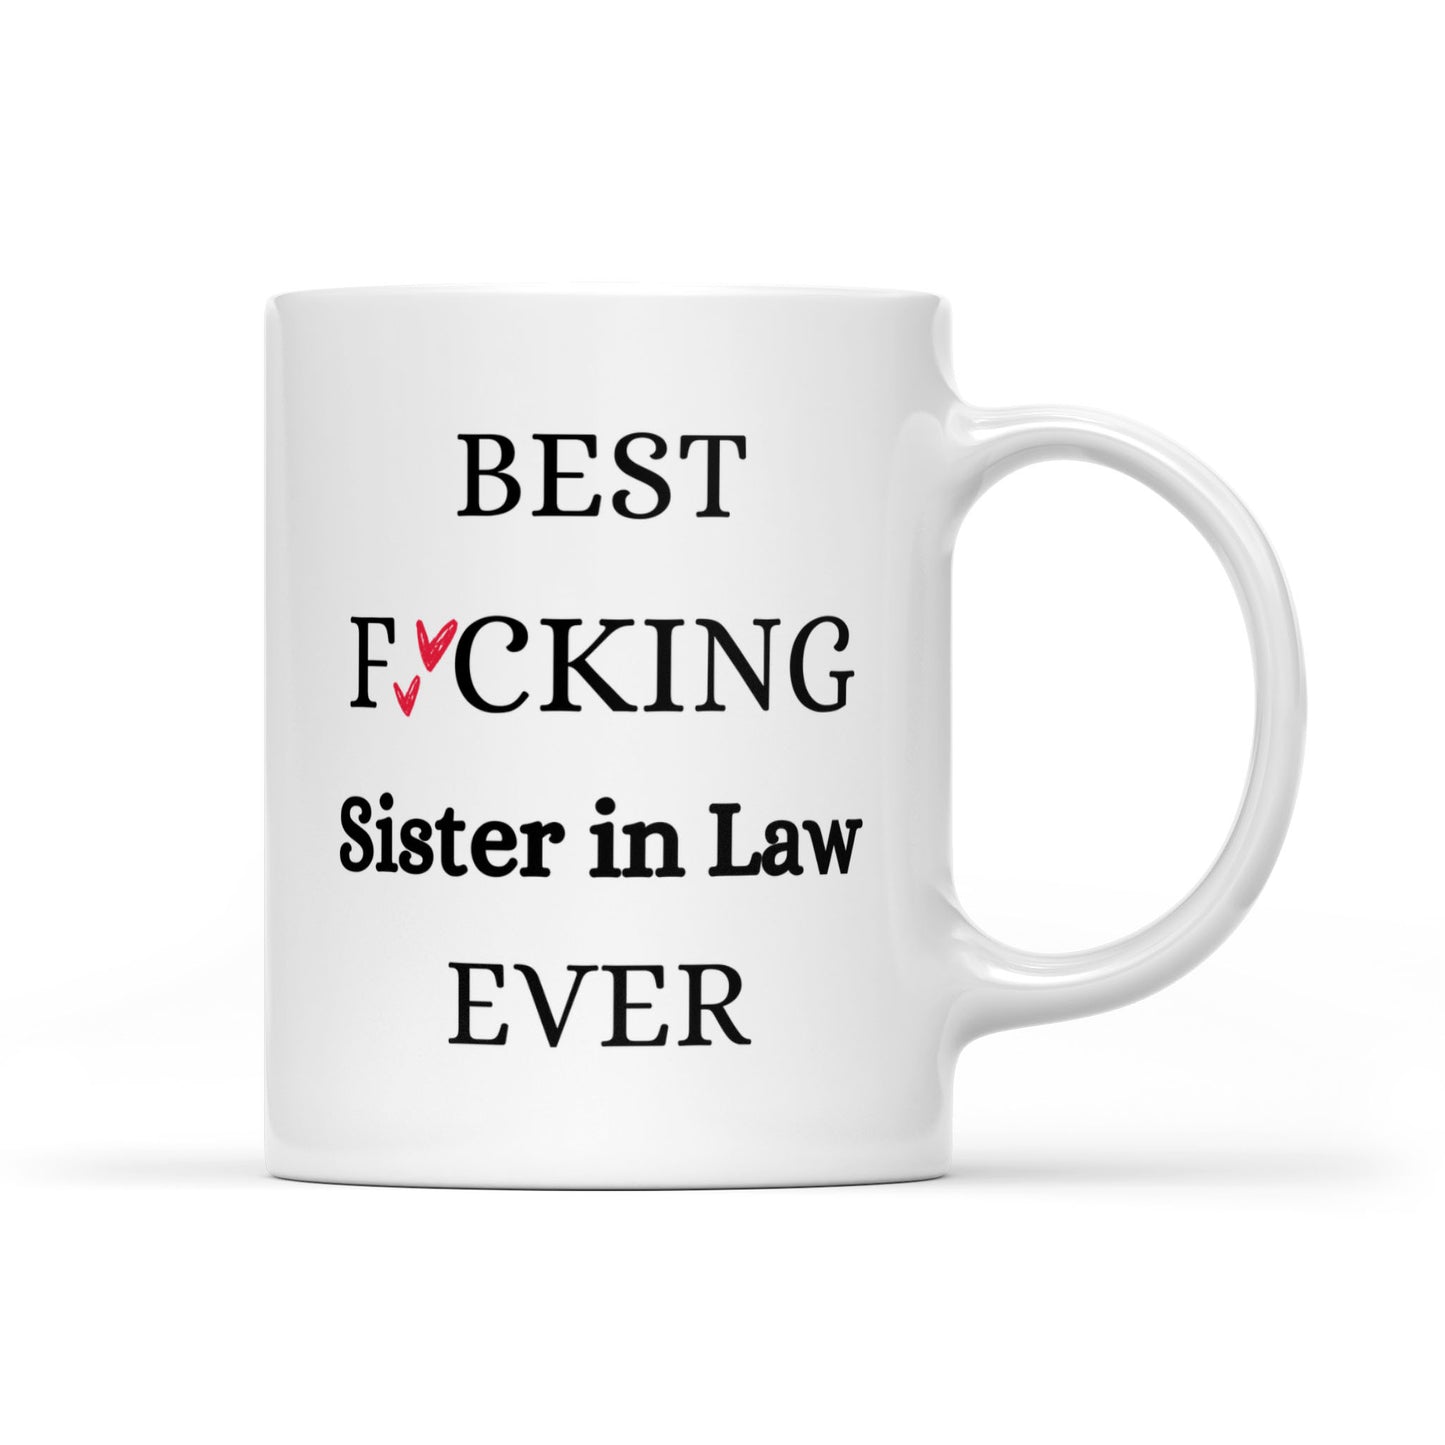 Best Fucking Sister In Law Ever Mug - side view